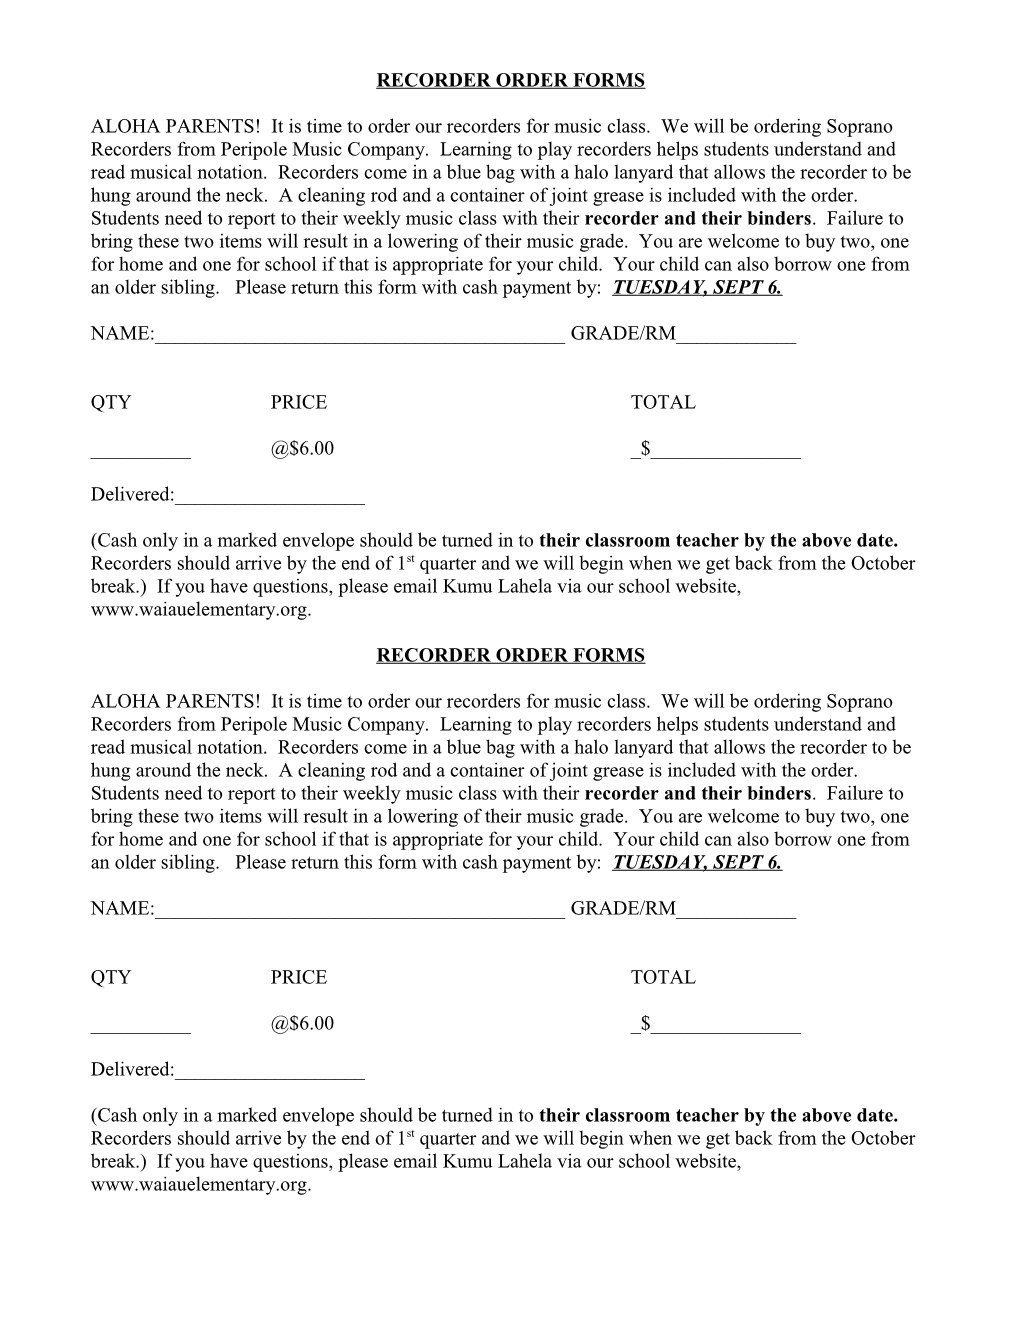 Recorder Order Forms